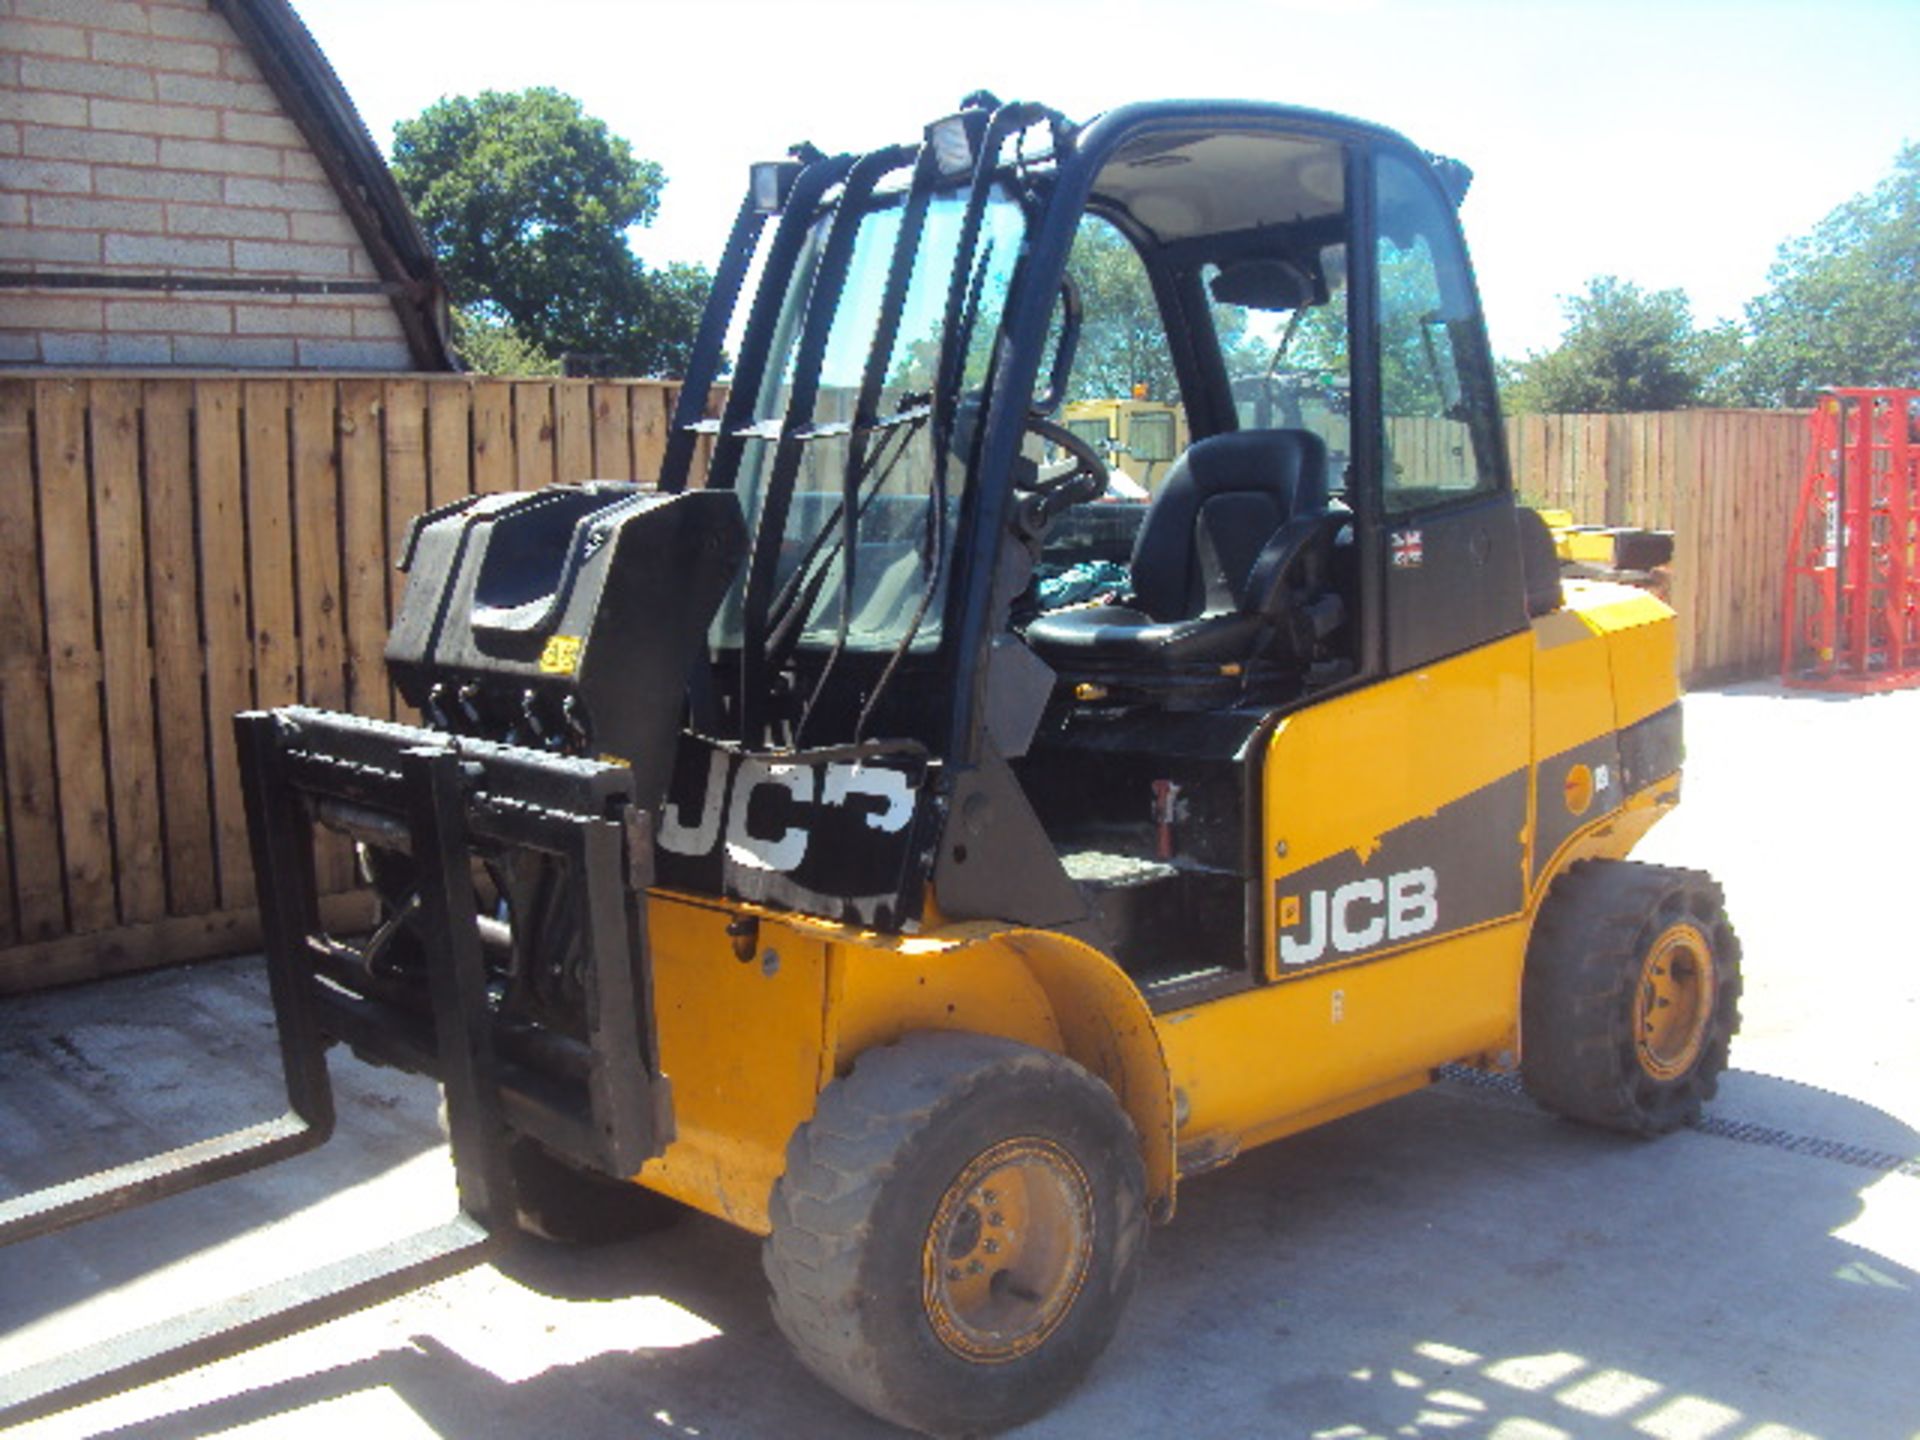 2011 JCB TLT35D 4x4 Teletruck S/n: C01540635 (3504 recorded hours) with 3rd service, forks & side-